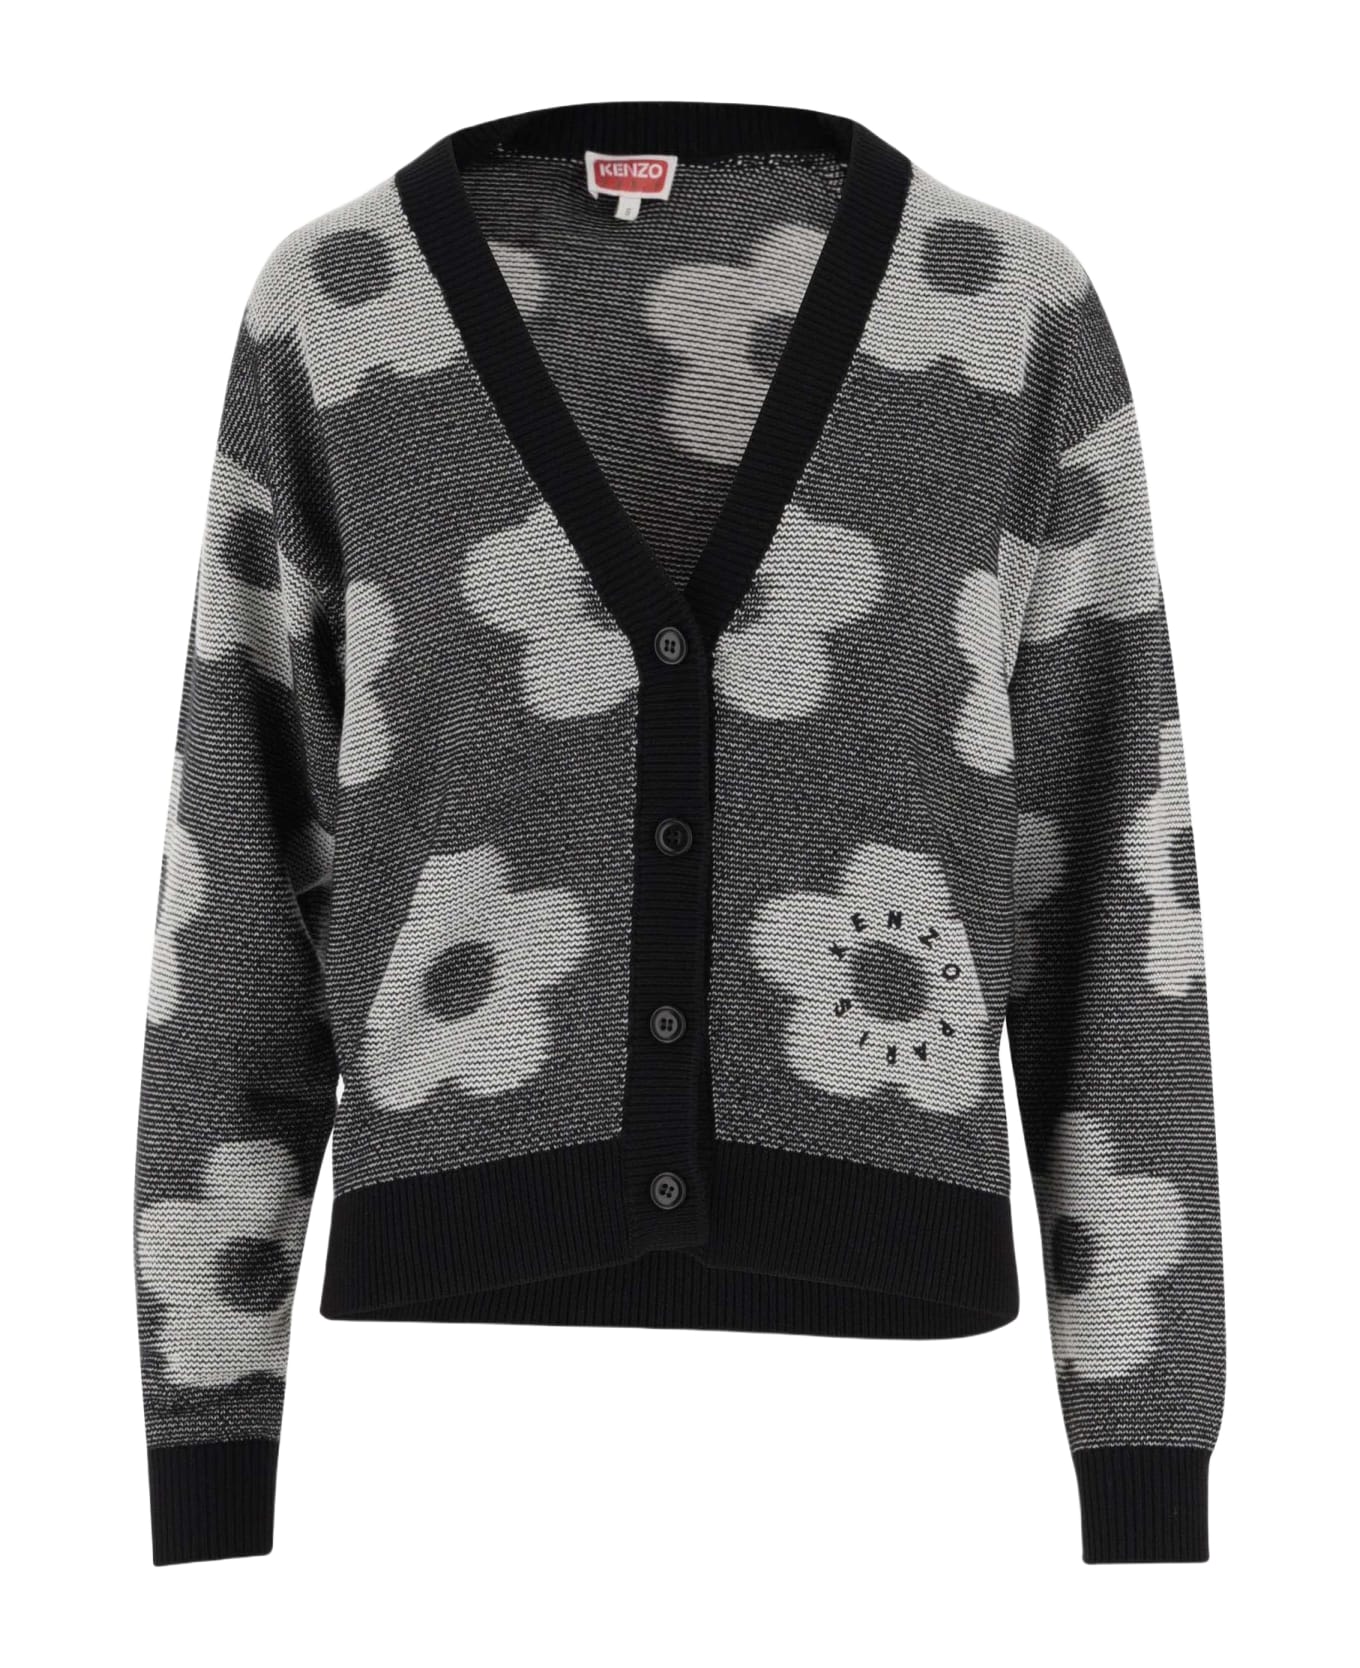 Kenzo Cotton Cardigan With Floral Pattern - Black